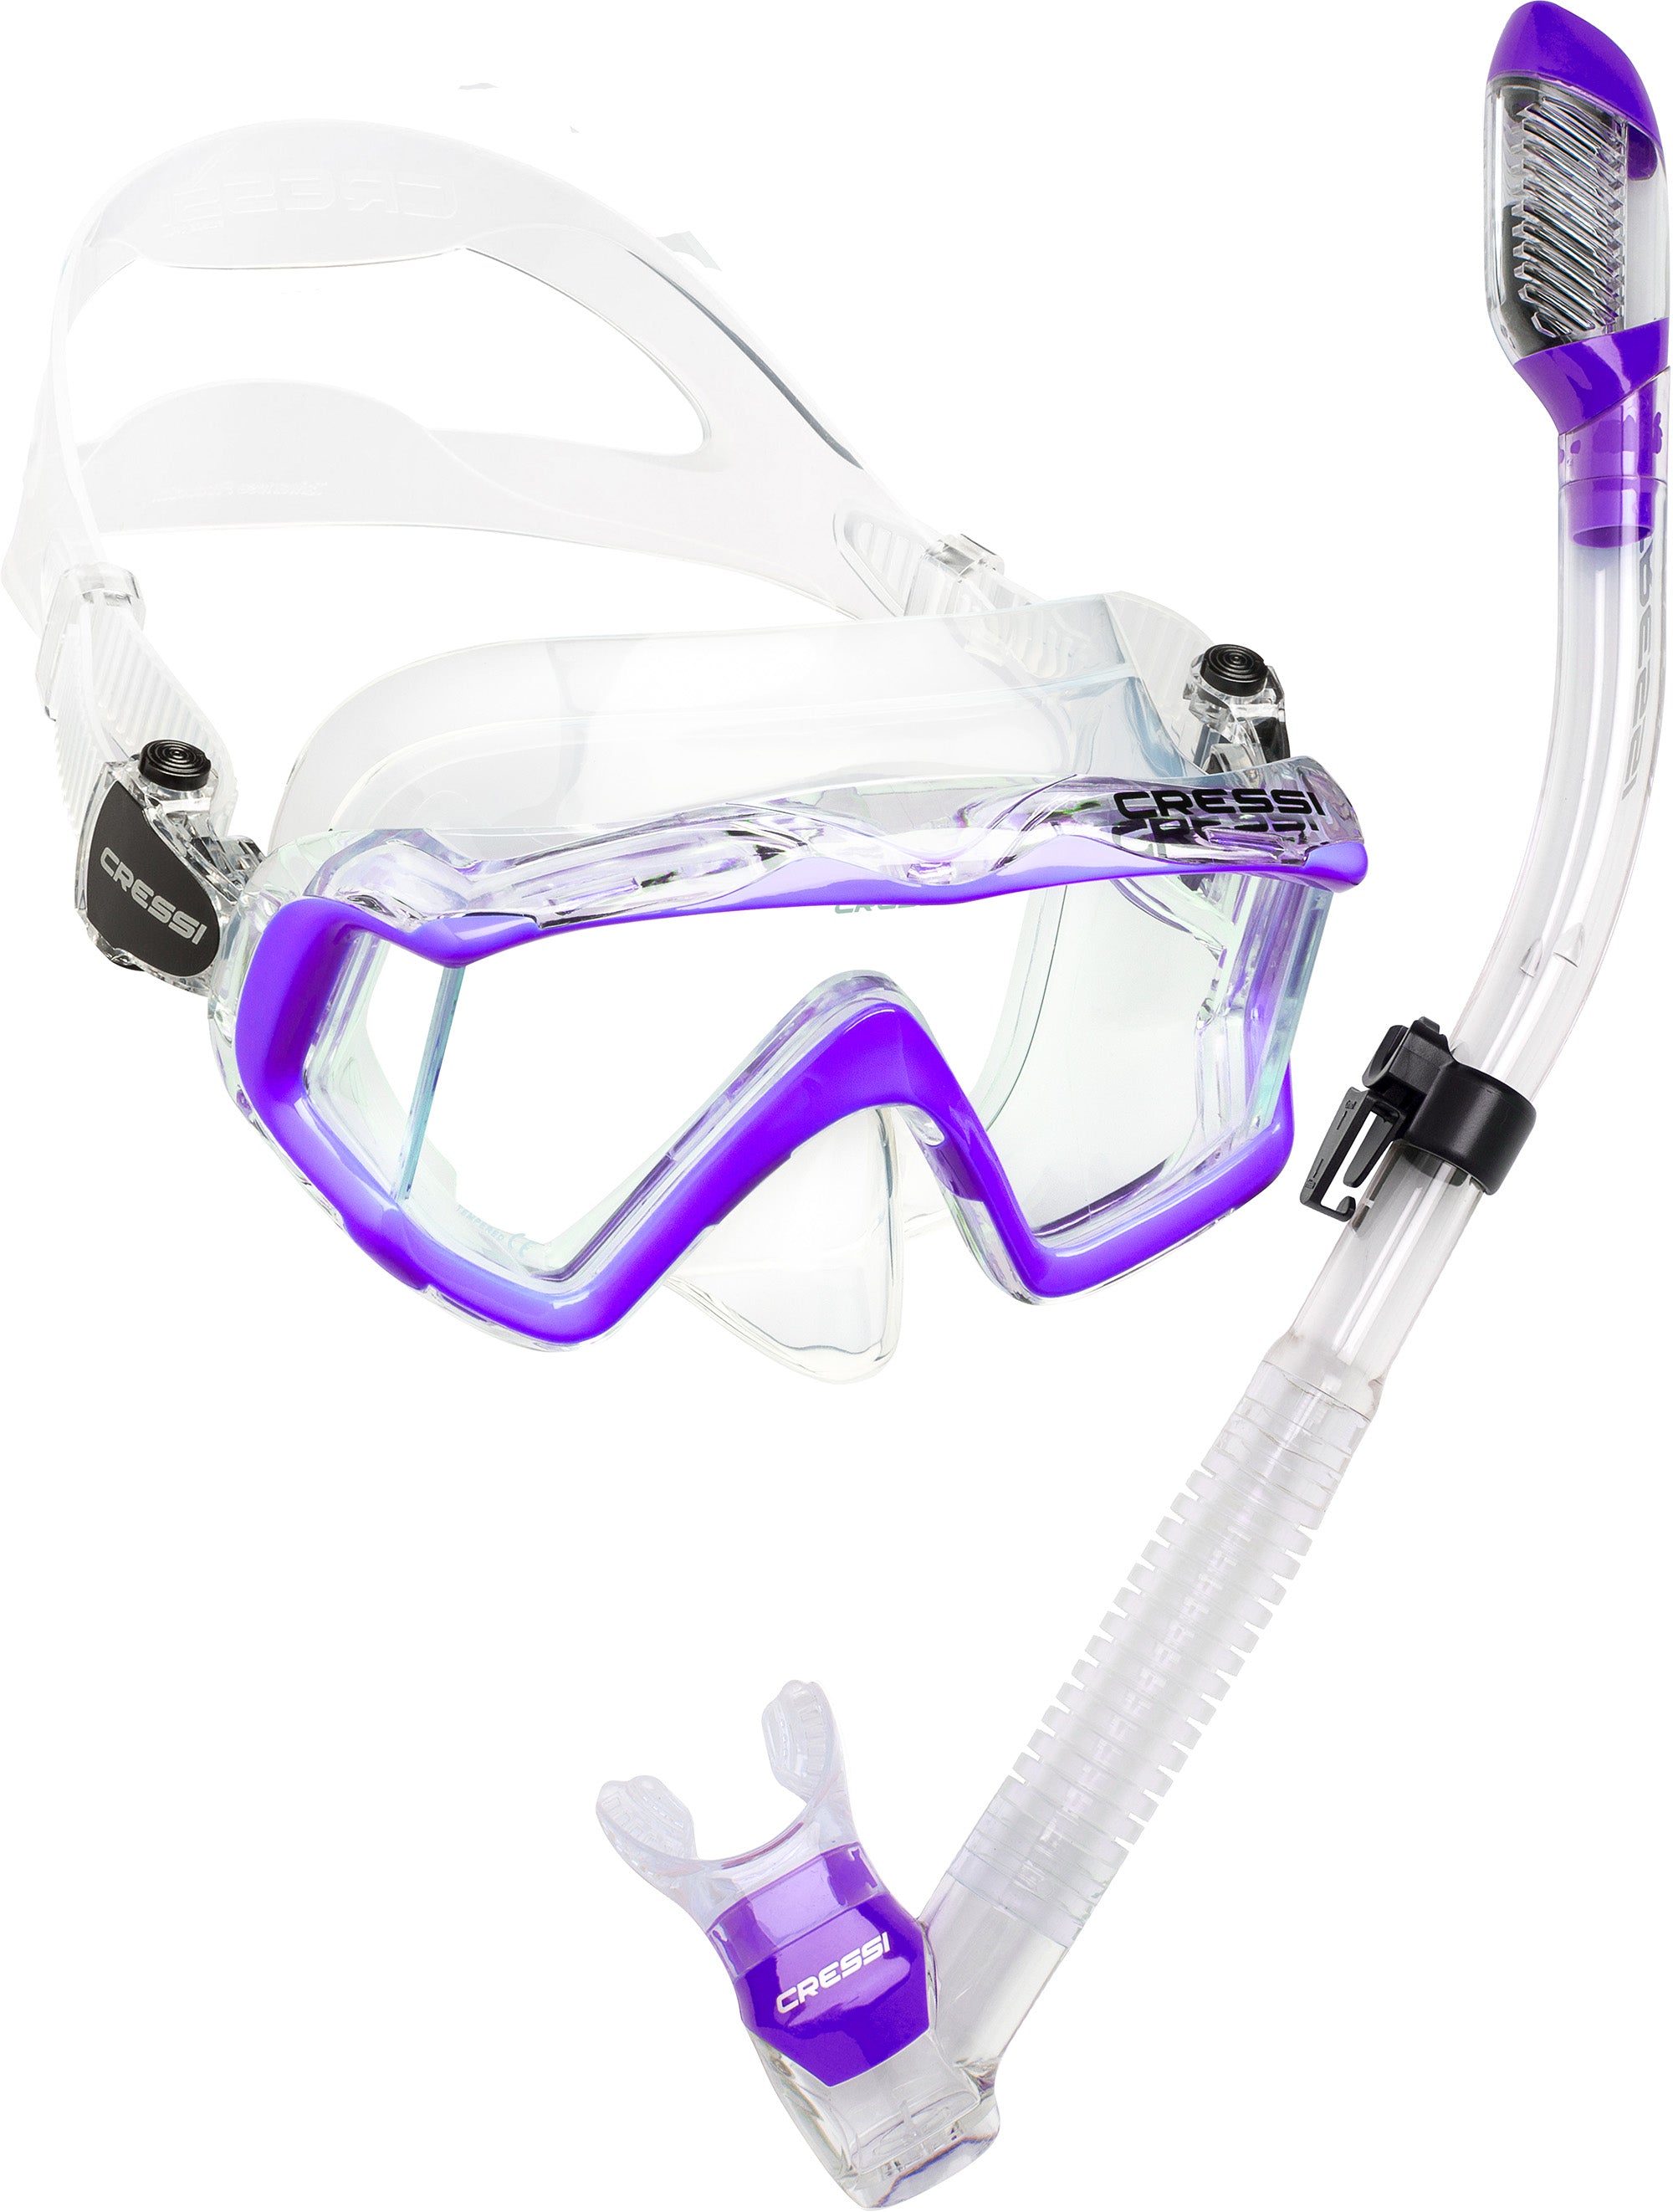 Cressi Liberty Duo Perfect View Scuba Diving and Snorkeling Mask